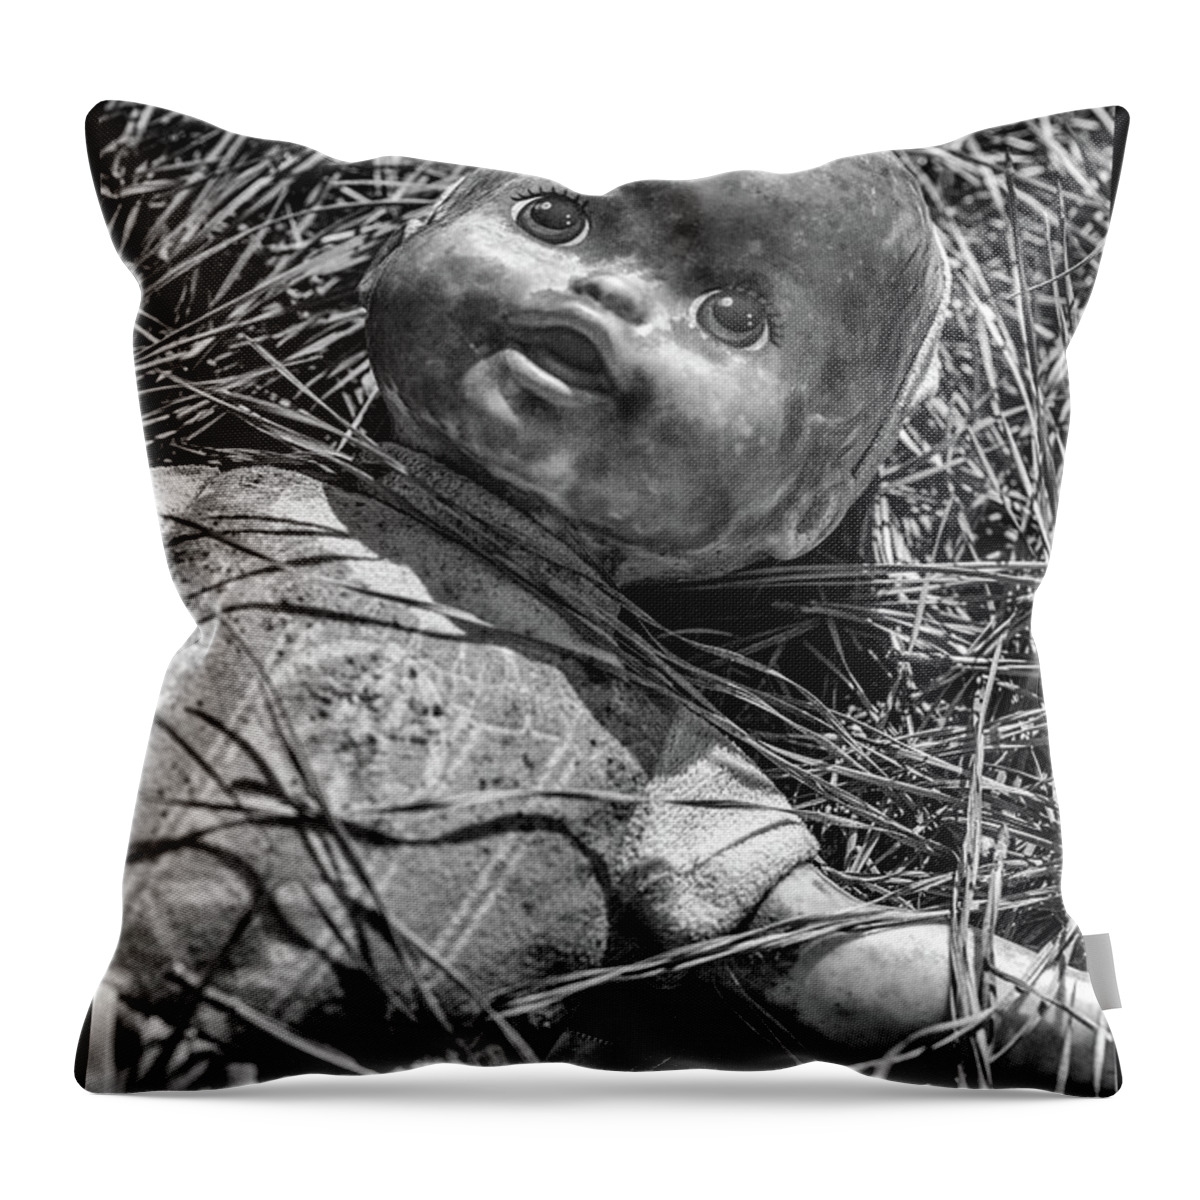 Antique Doll Throw Pillow featuring the photograph Old Dolls In Grass by Matthew Pace